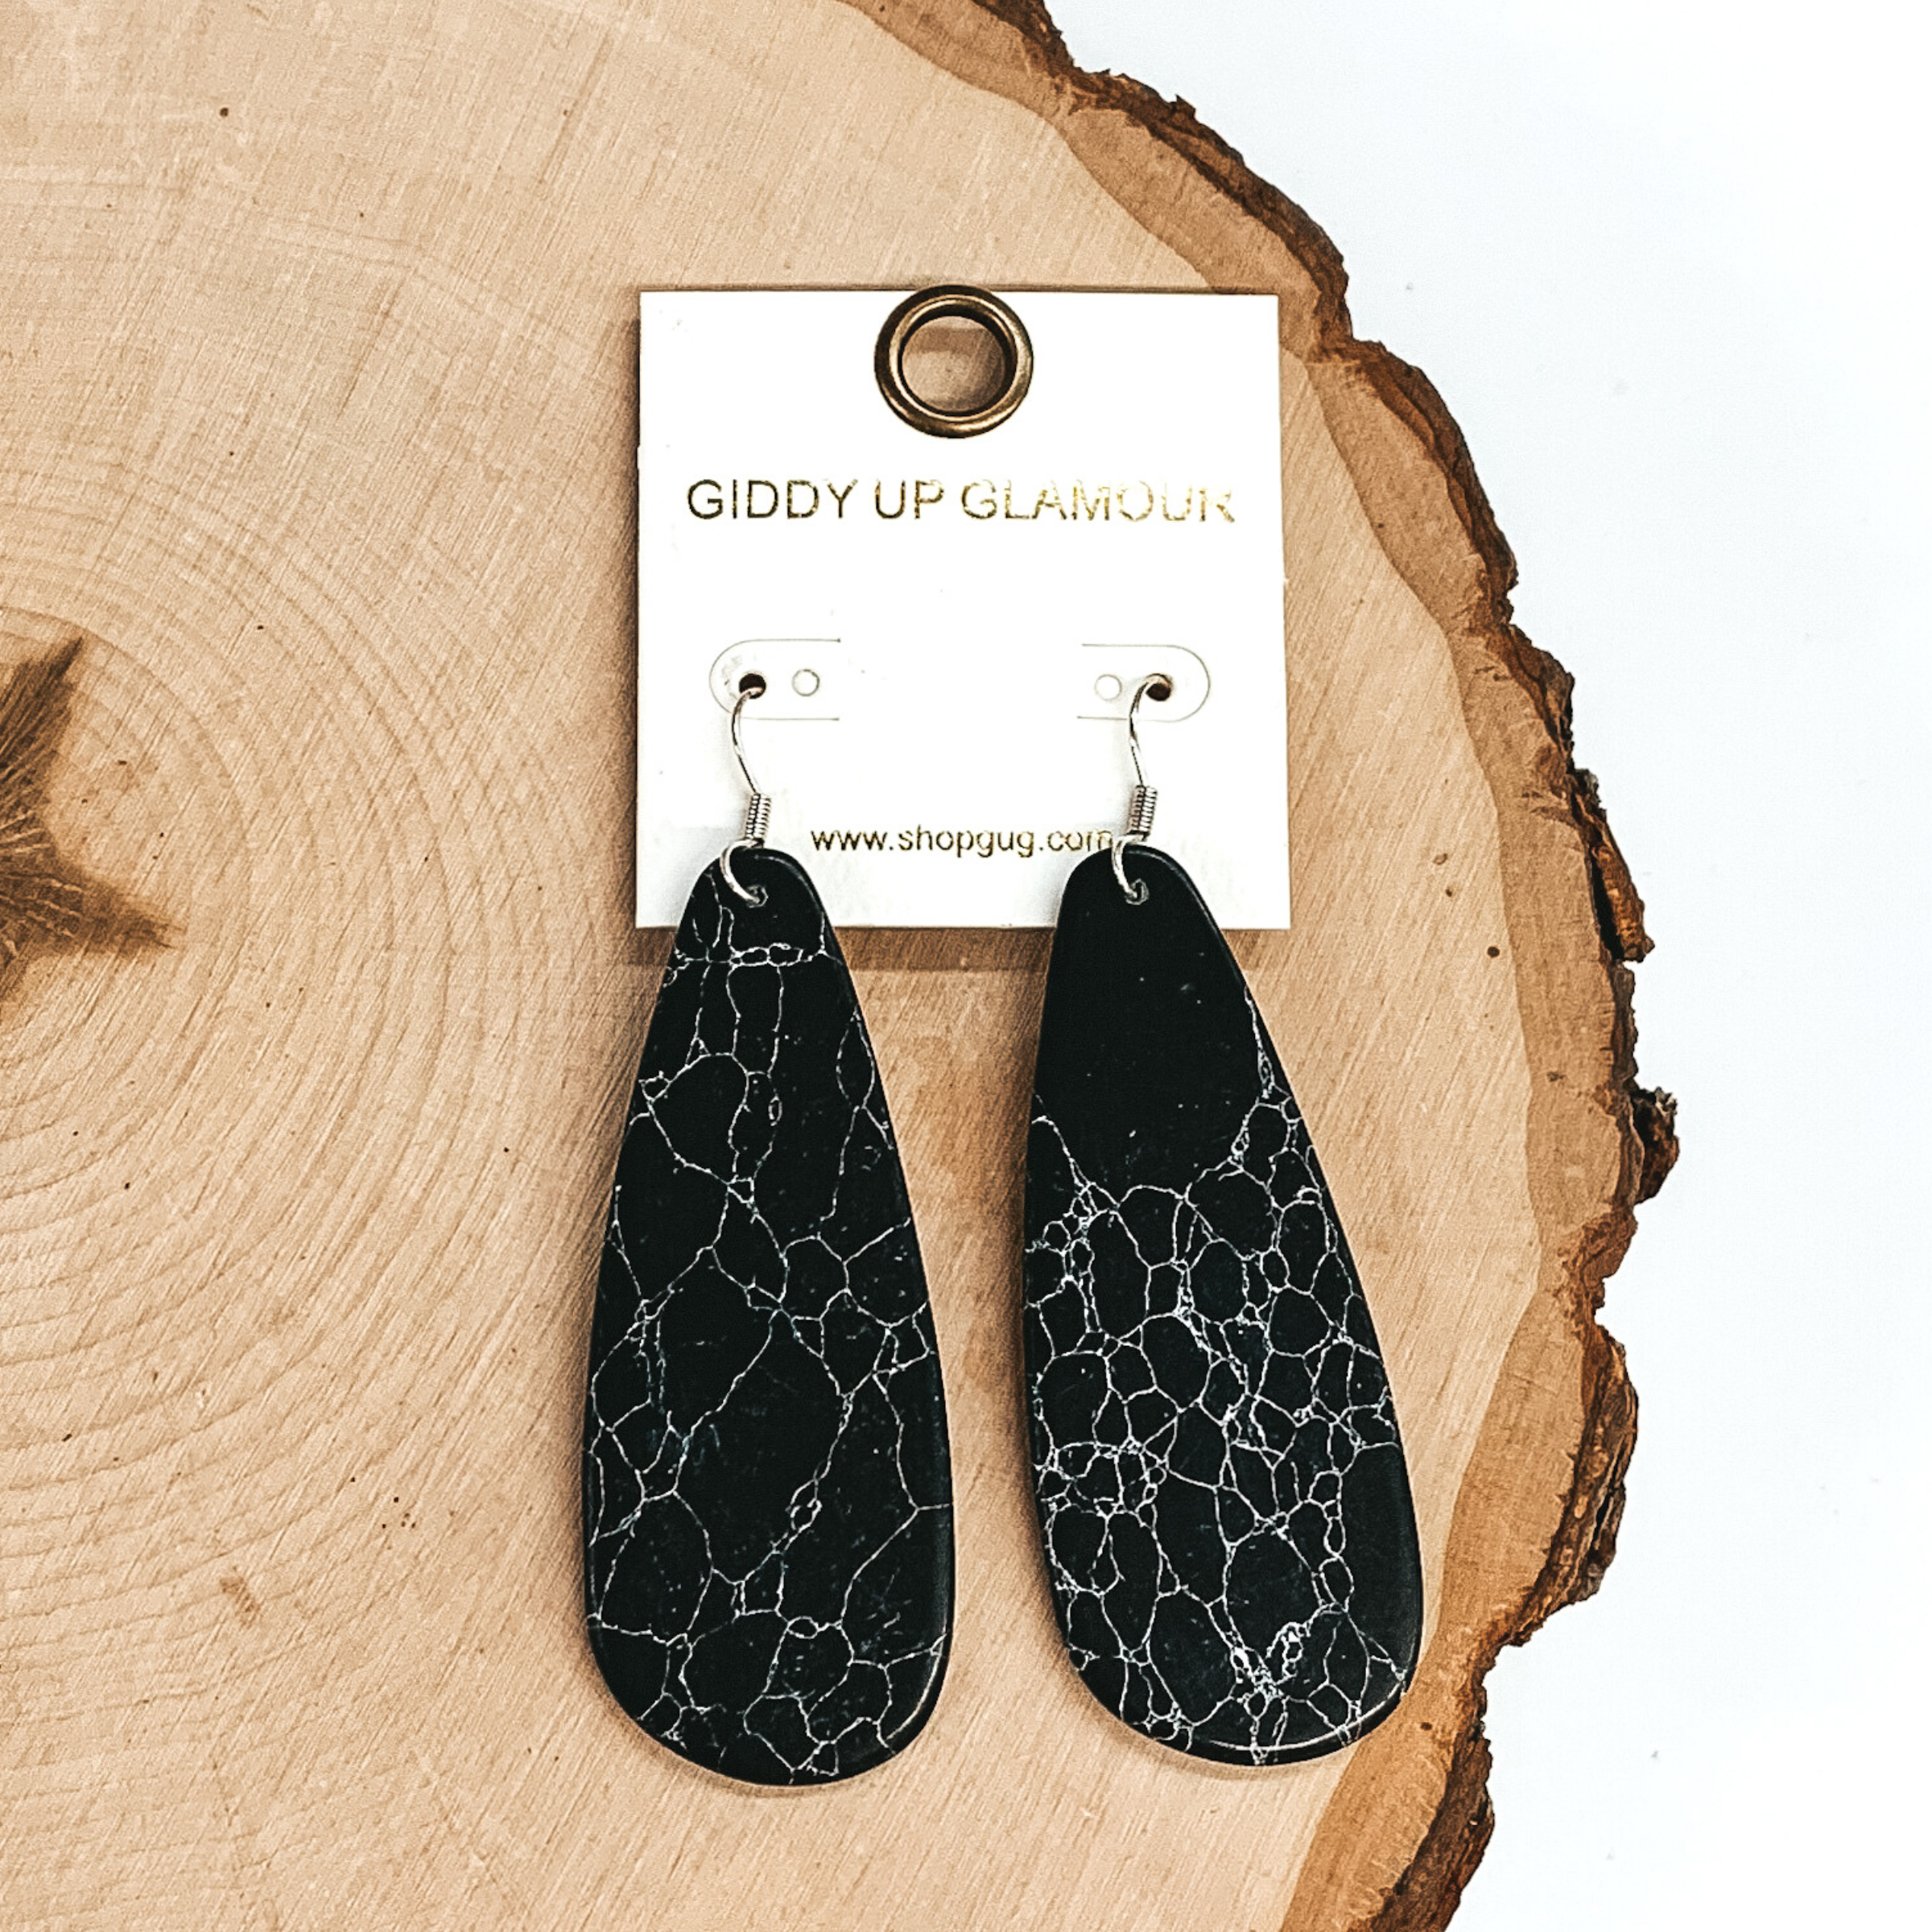 Teardrop shaped stone earrings. These dangle earrings have a marbled look and is in a black color. These earrings are pictured laying on a piece of wood on a white background.